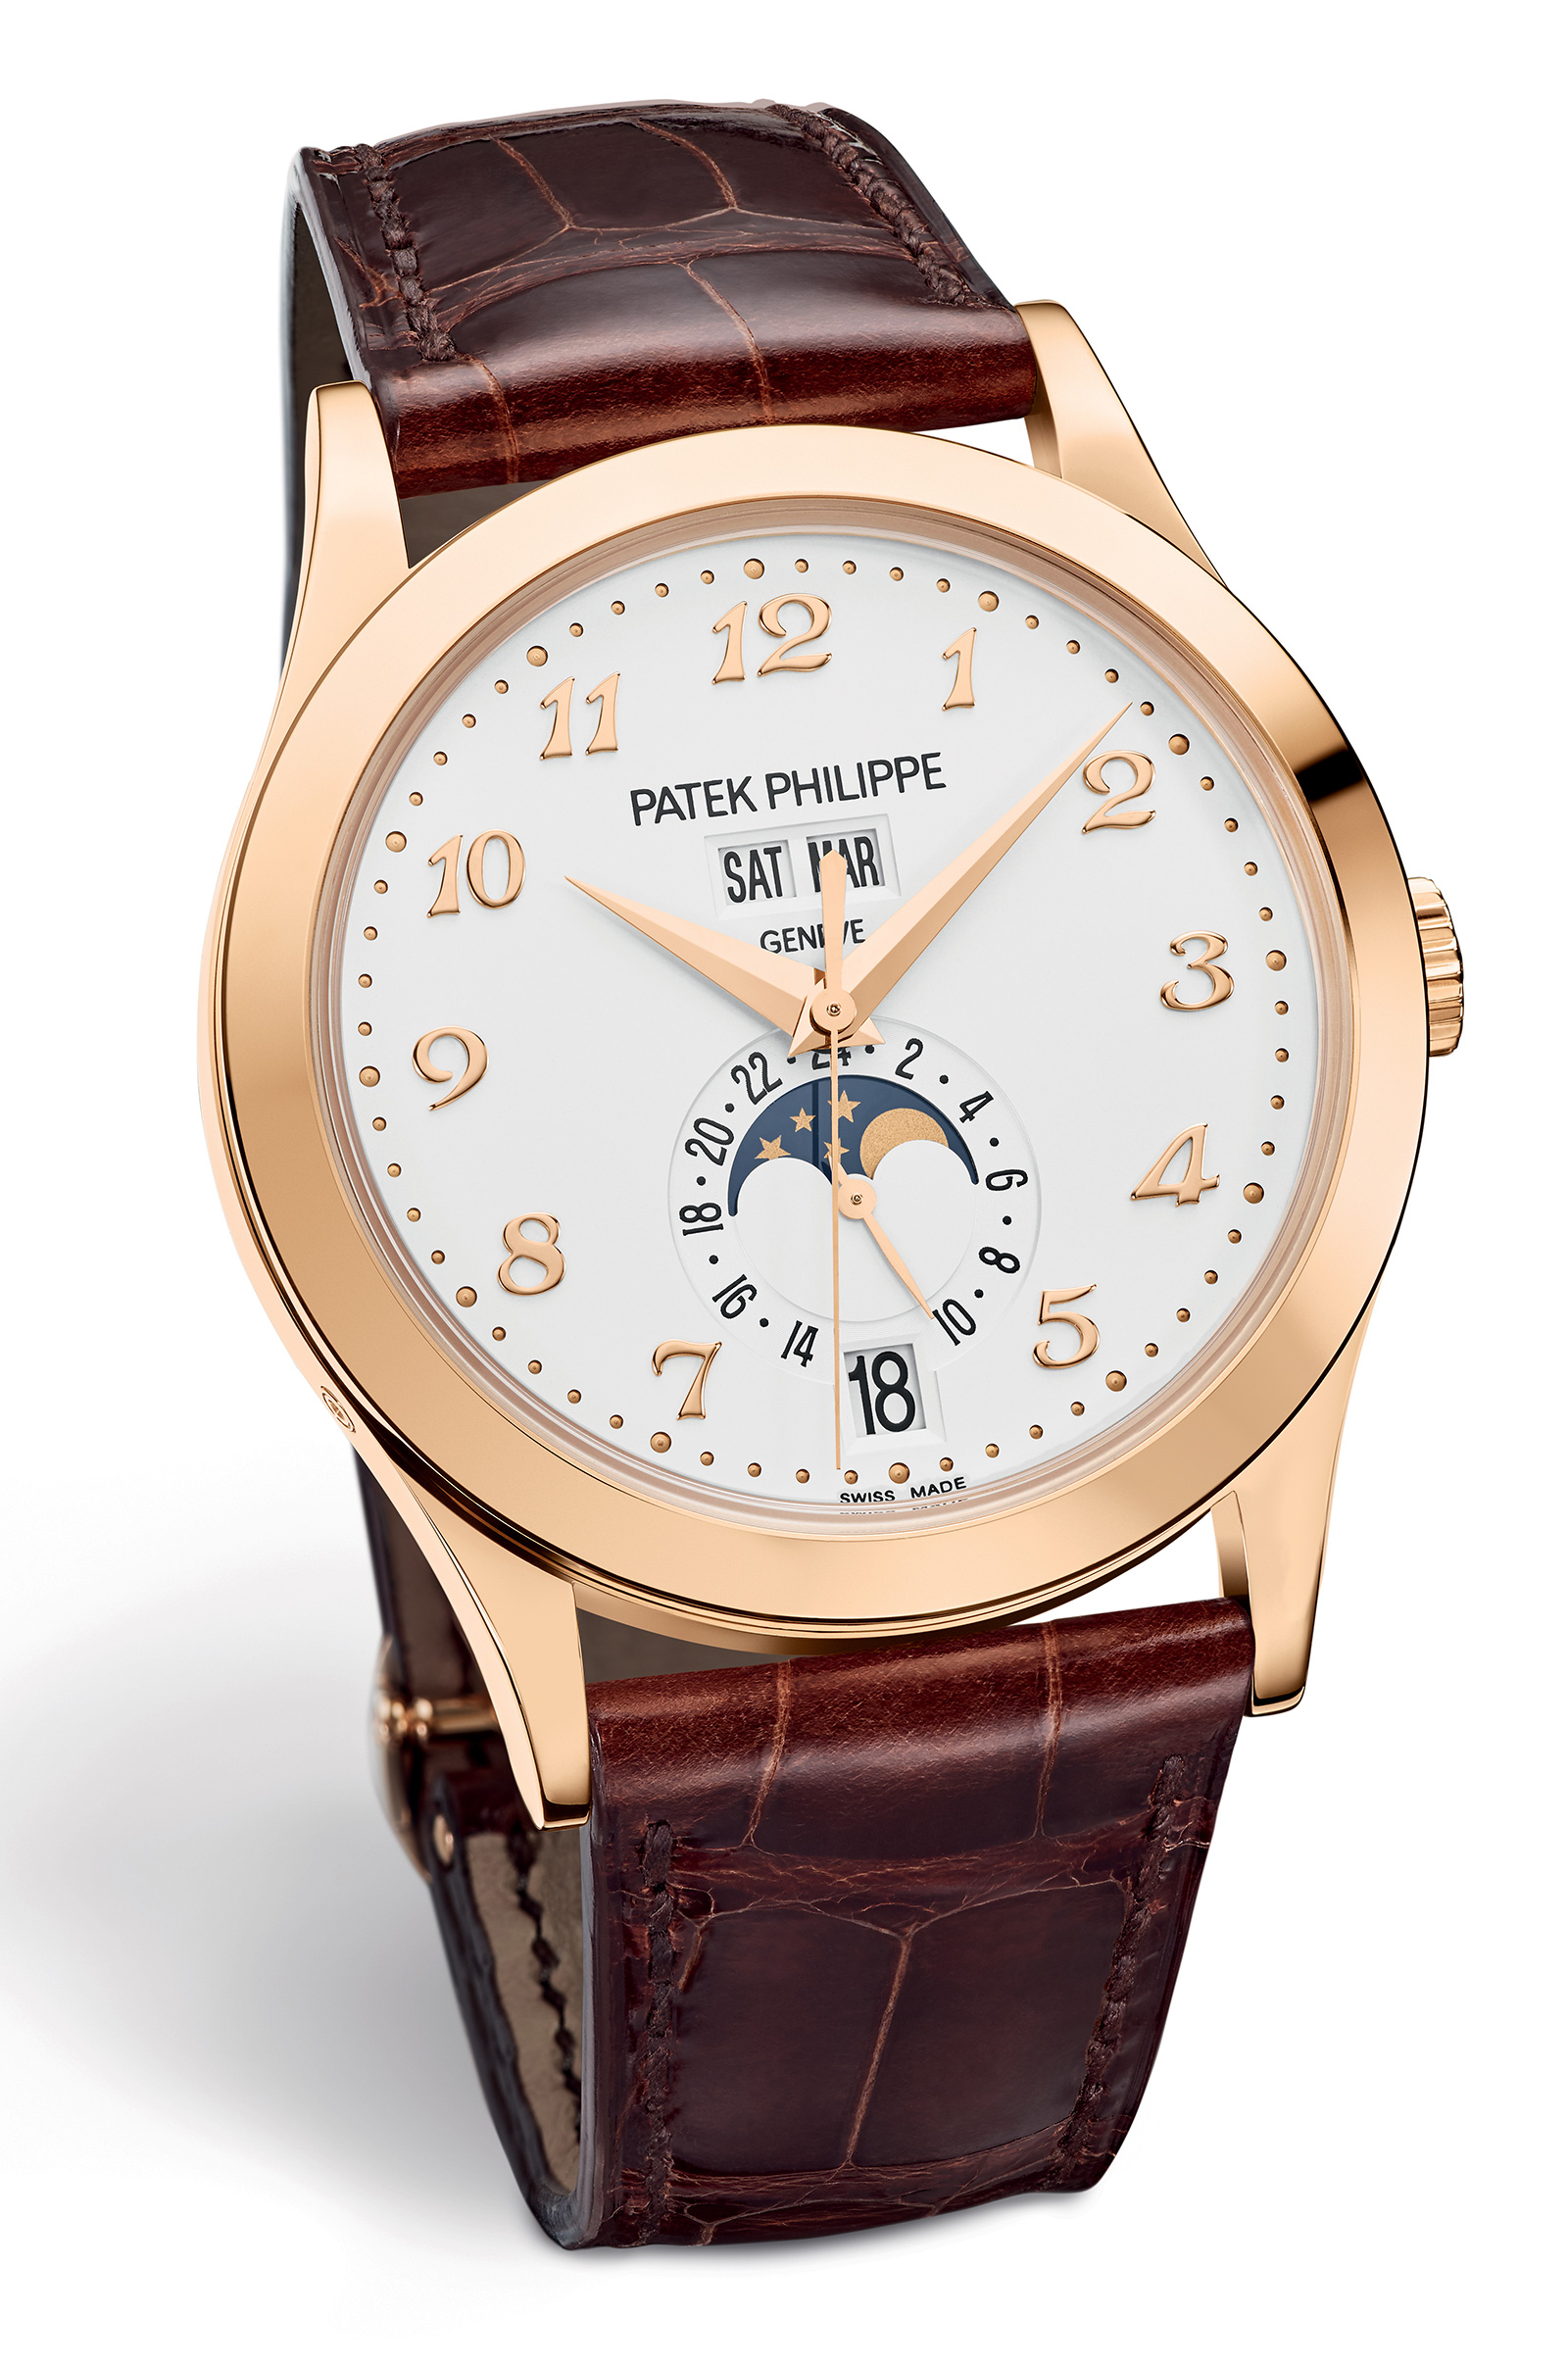 Annual Calendar 5396 in Rose Gold On Brown Alligator Leather Strap with Silver Opaline Dial